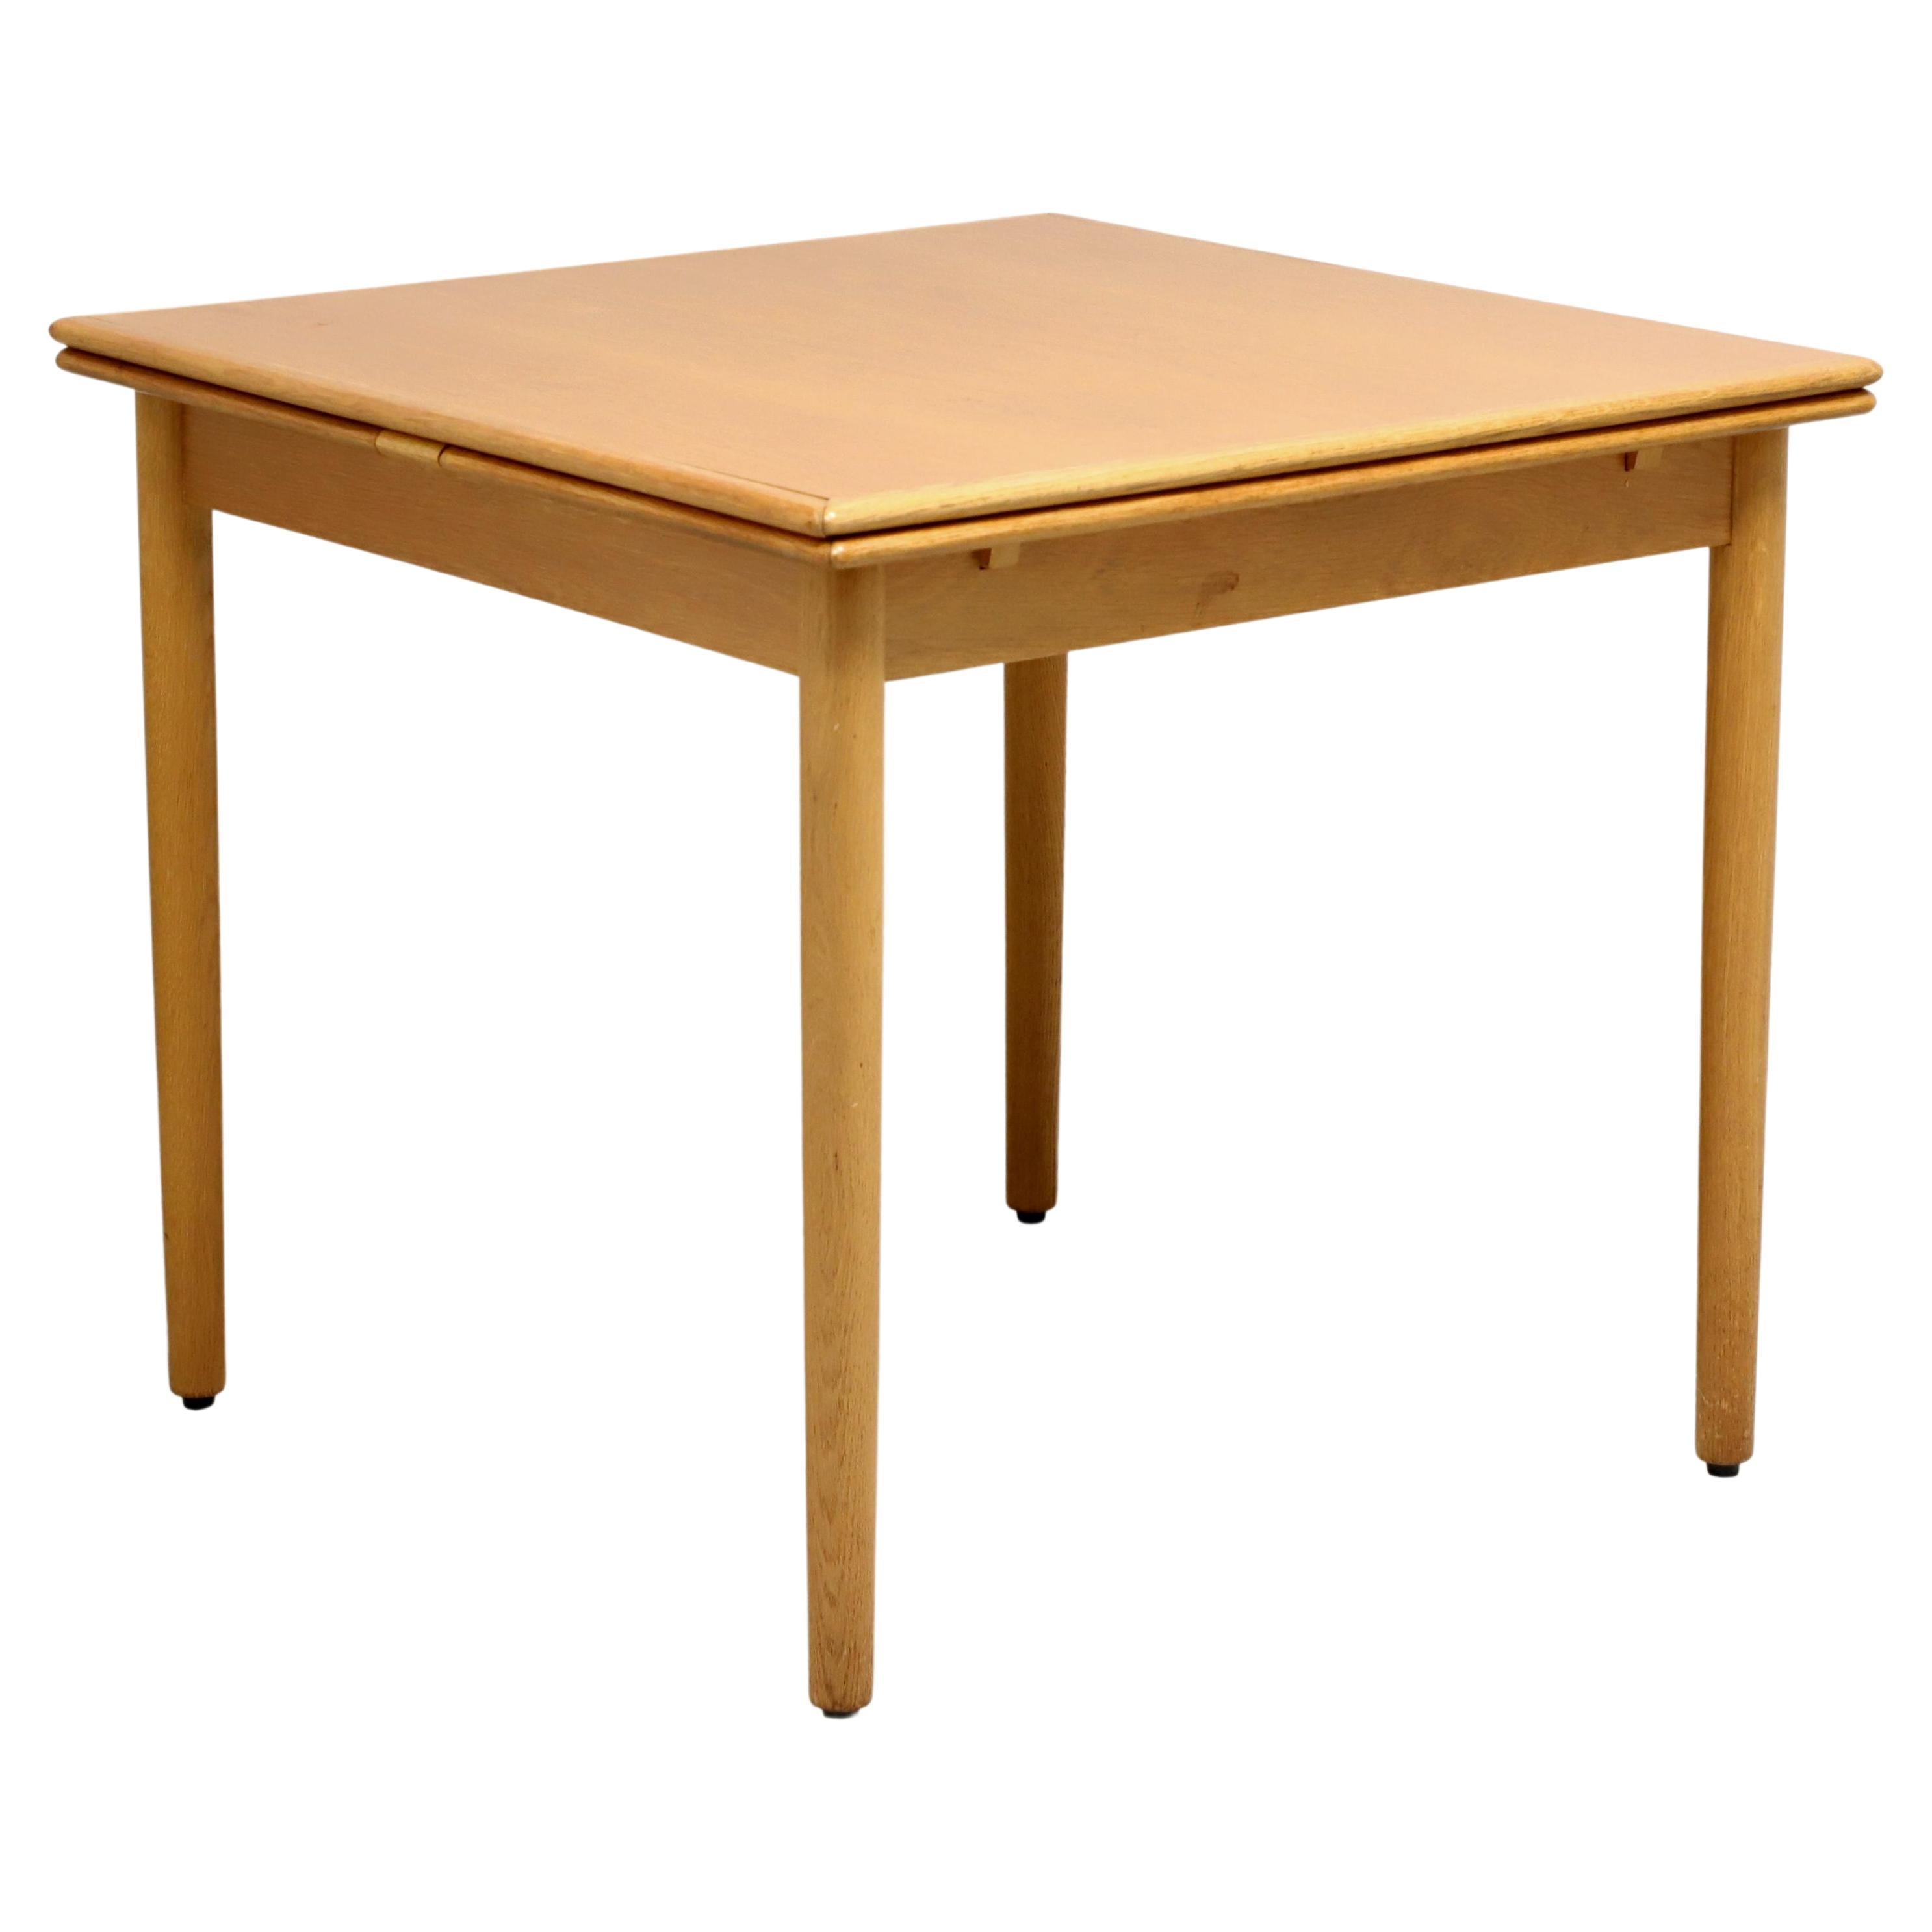 Mid 20th Century Danish Modern Oak Square Drawtop Dining Table For Sale